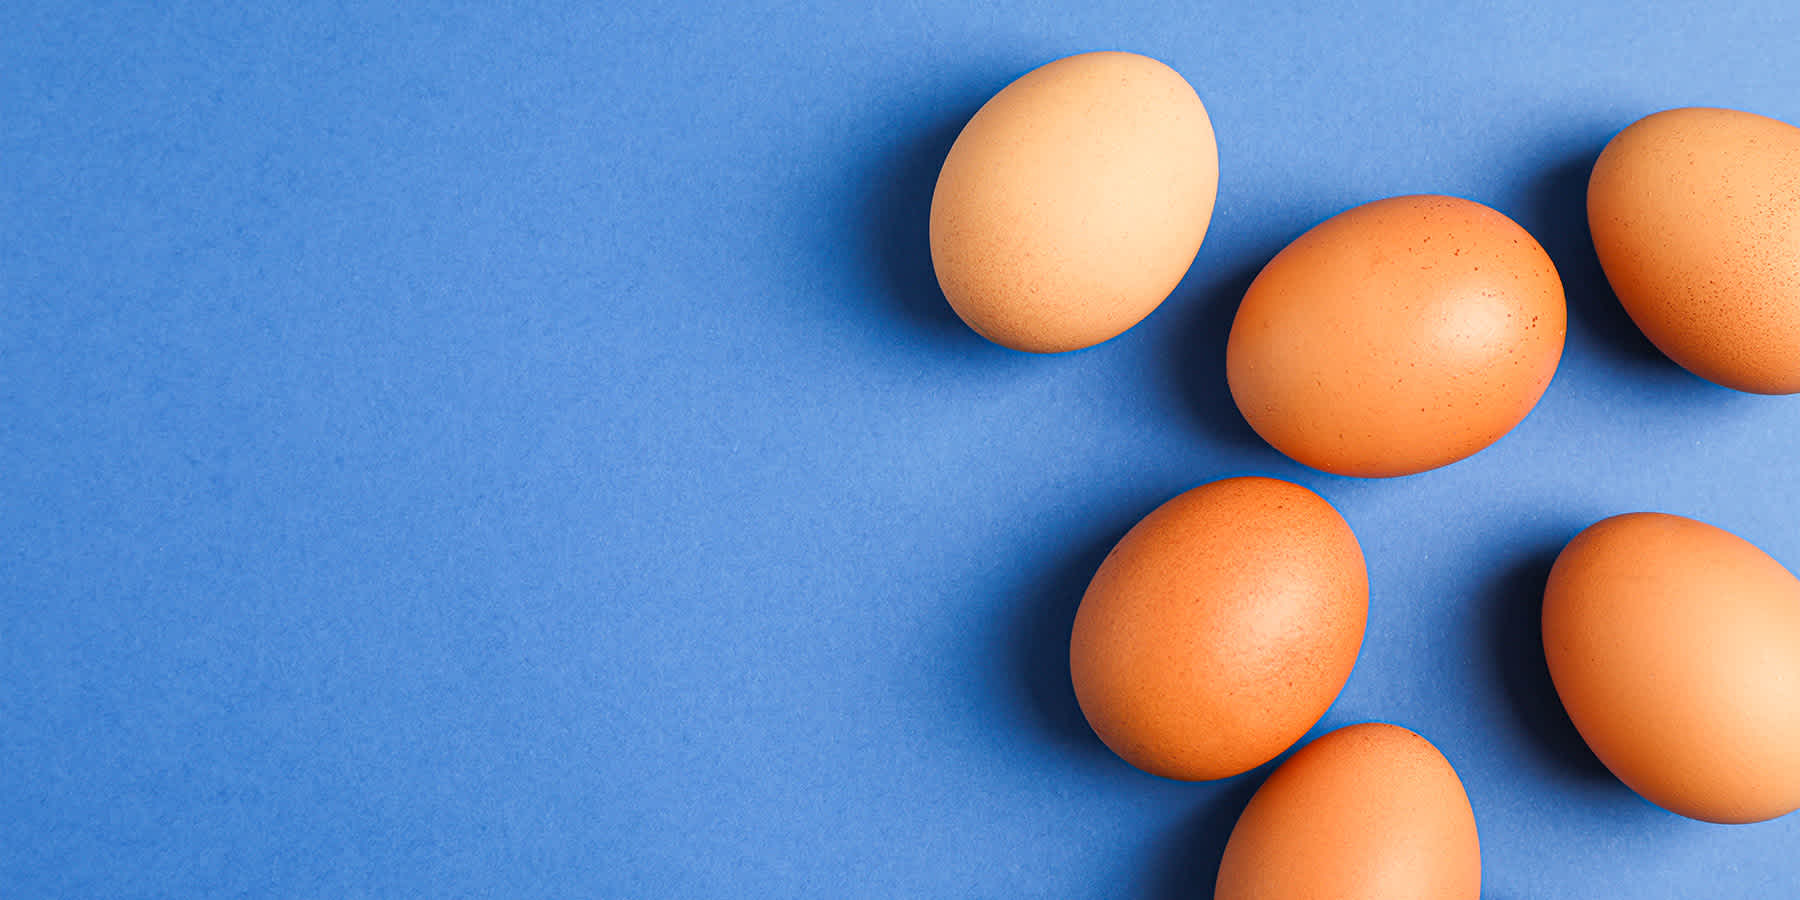 Several eggs against a blue background as an example of a food for a low fructose diet